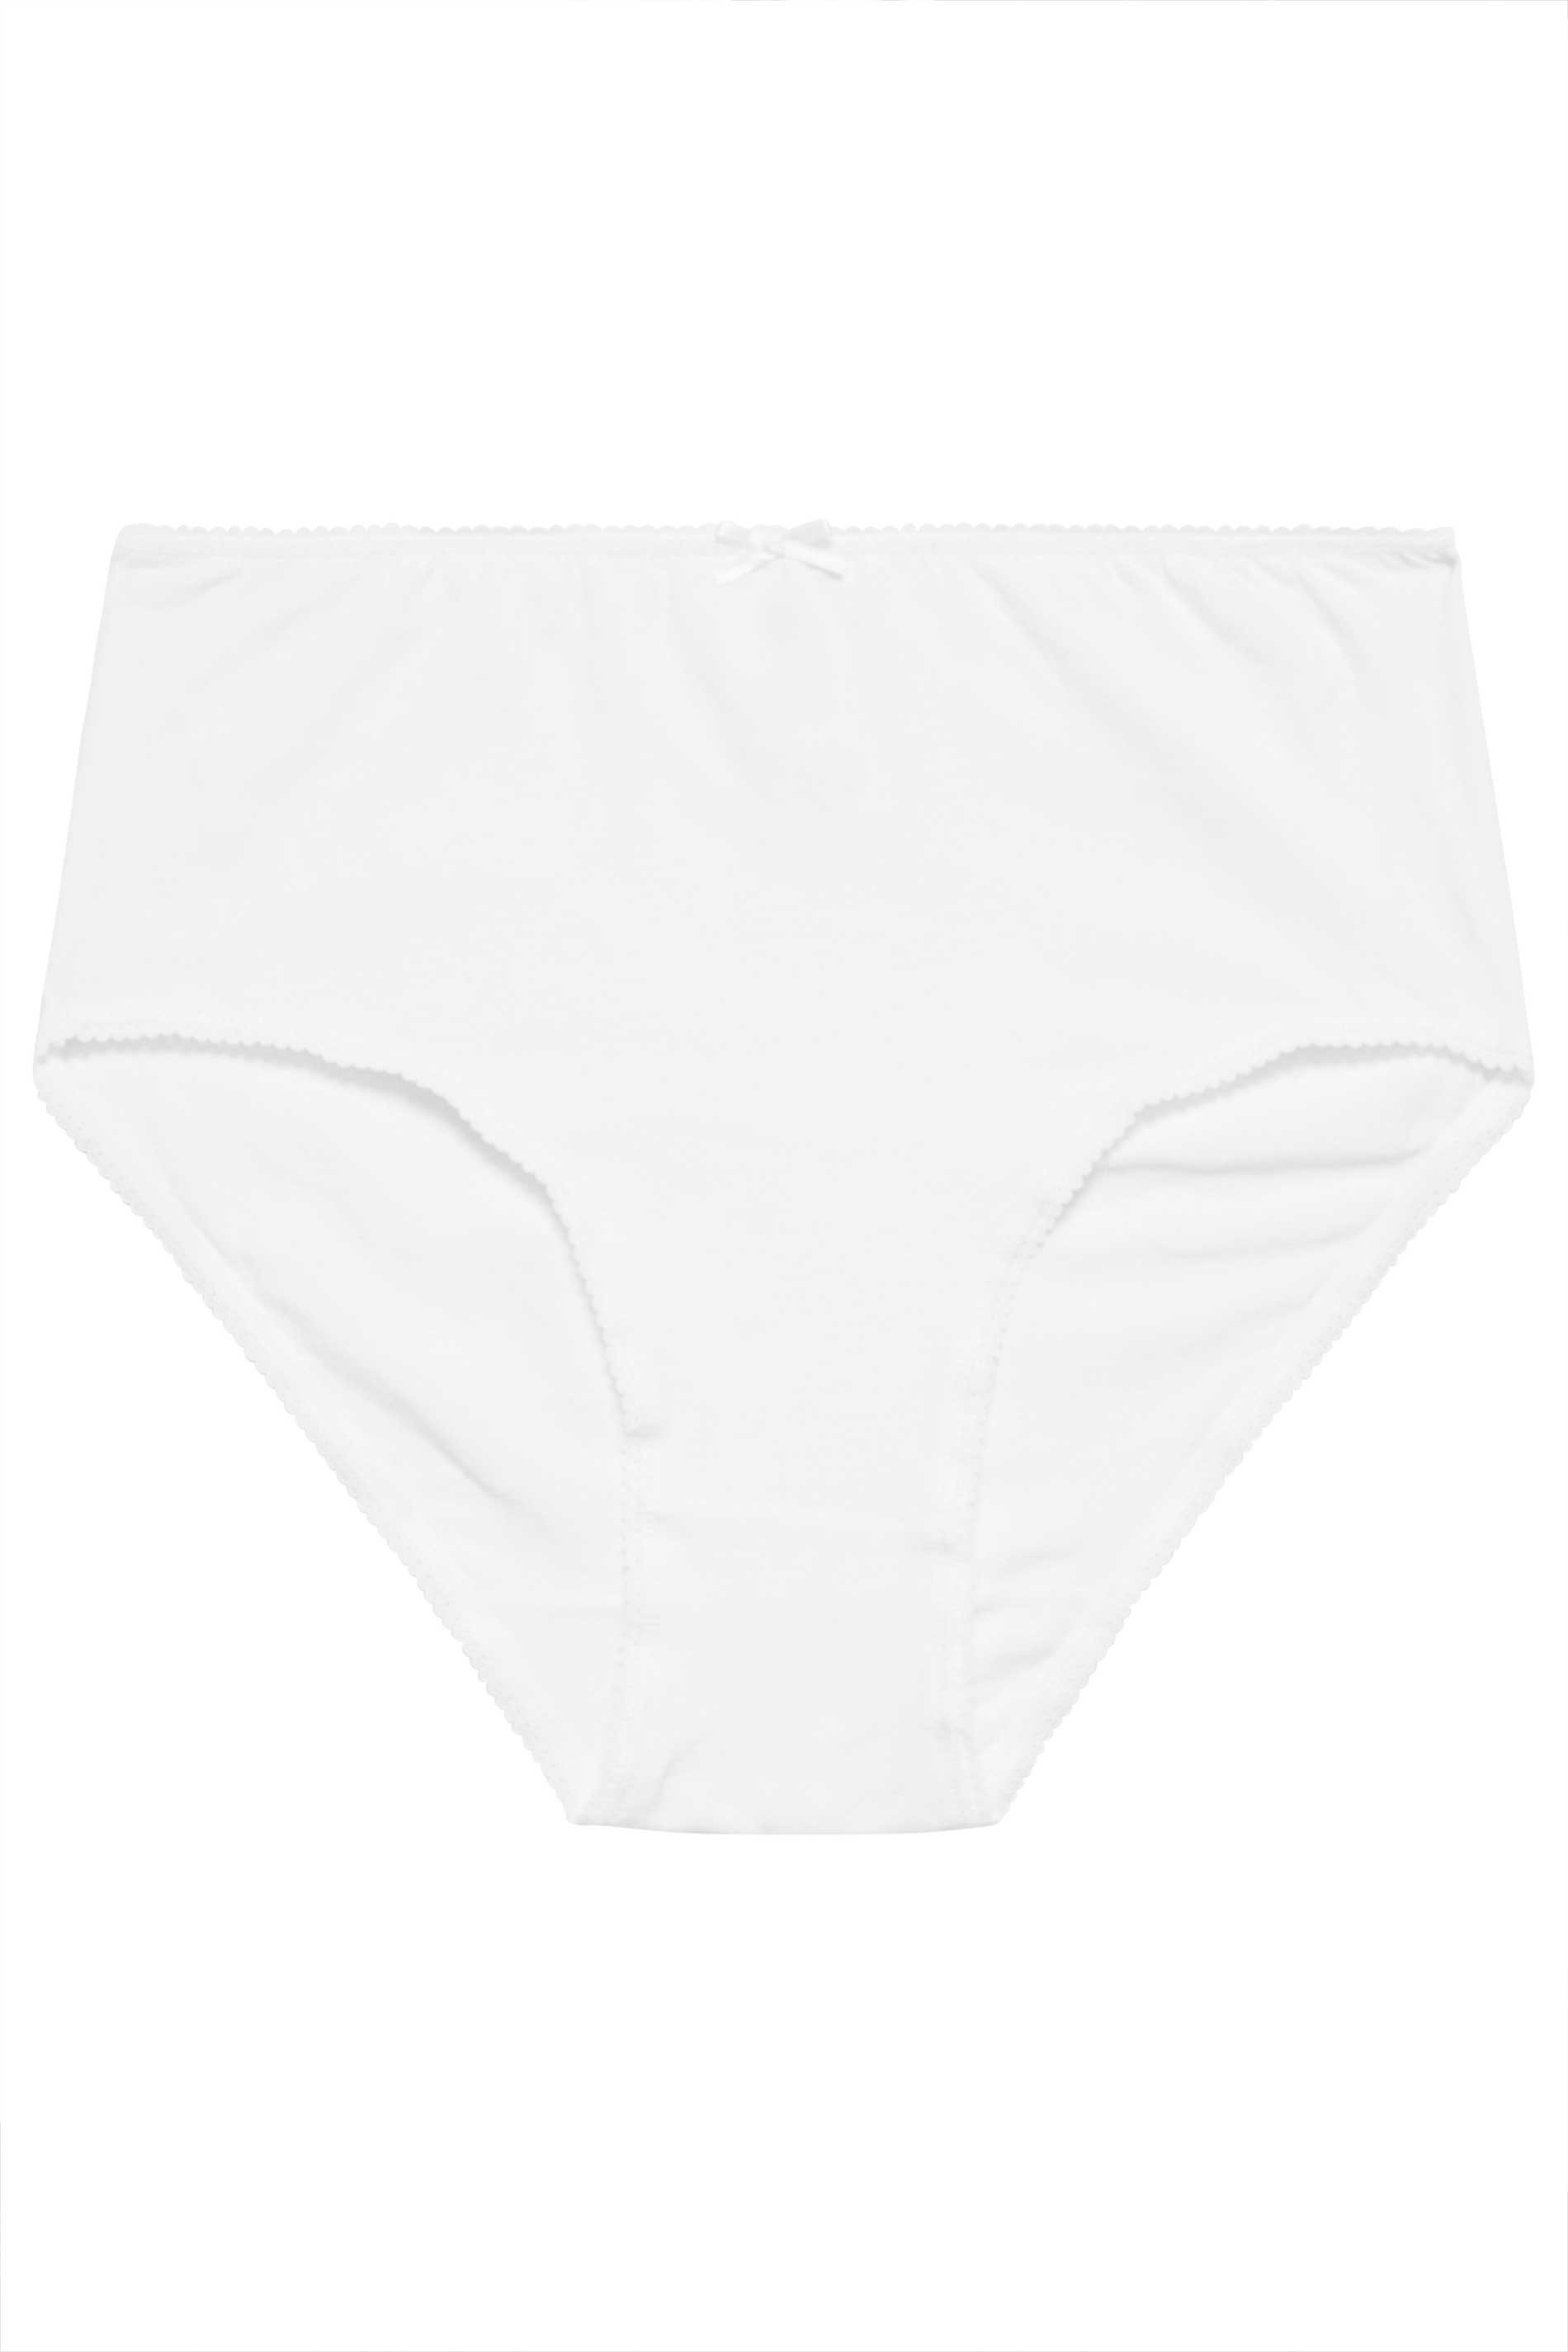 M&Co White 5 PACK High Waisted Full Briefs | M&Co